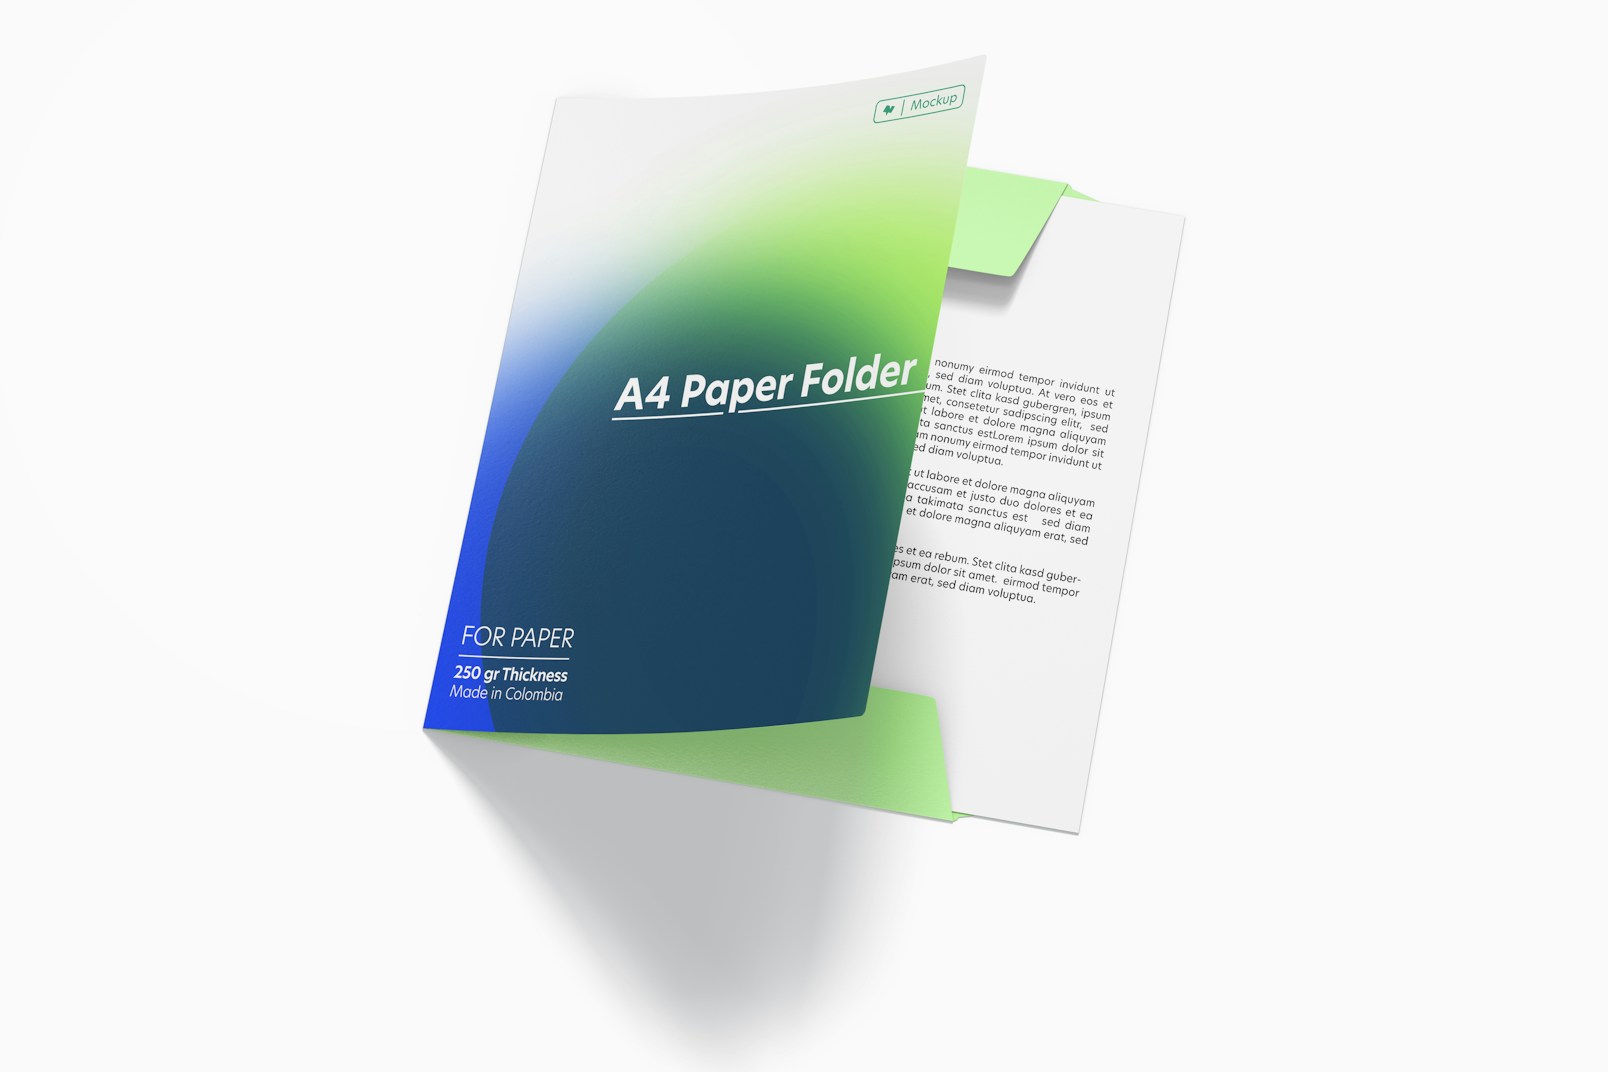 A4 Paper Folder Mockup, Perspective View